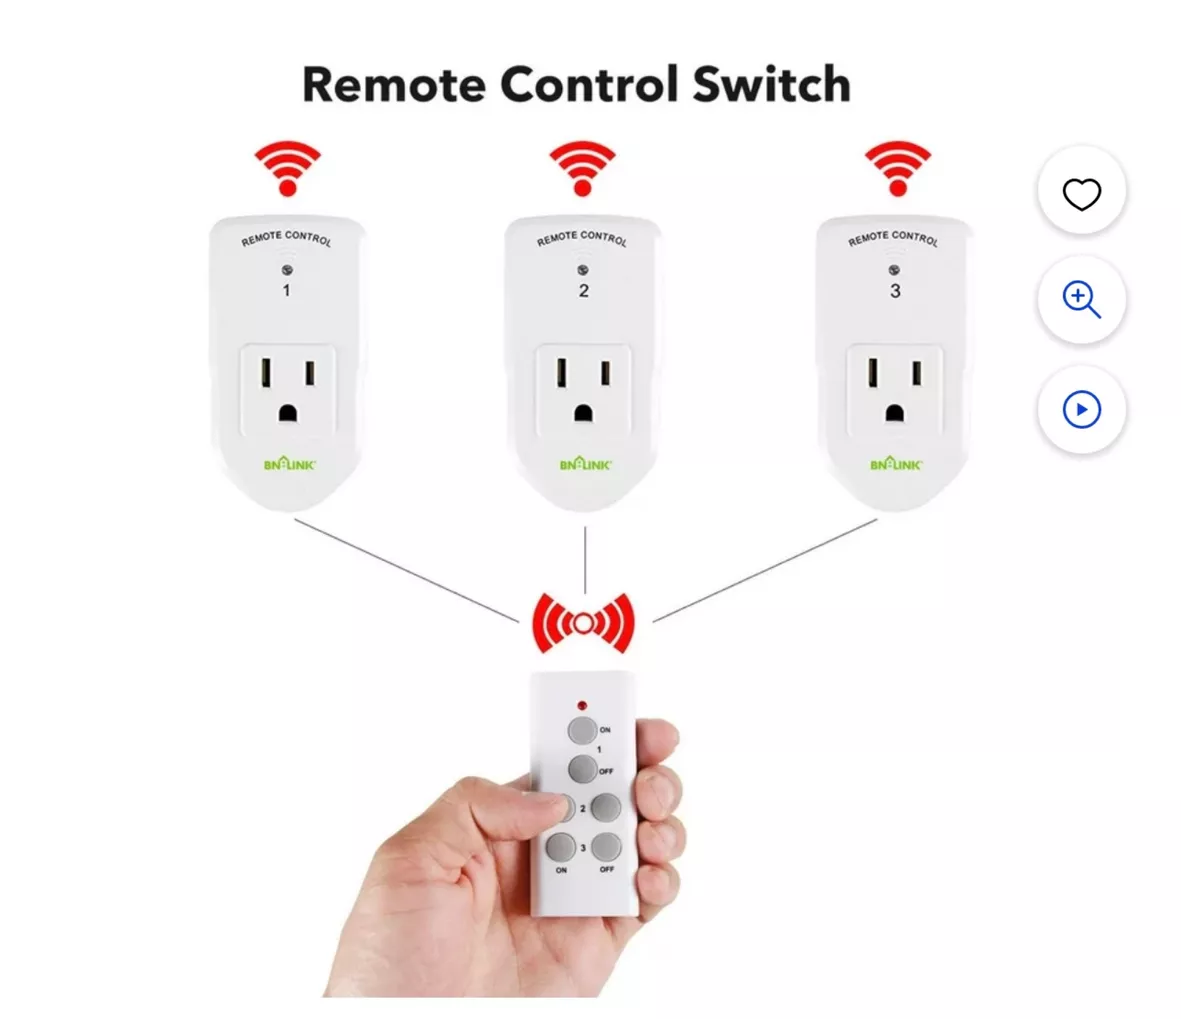 BN-LINK Wireless Remote Control Electrical Outlet Switch Indoor 3